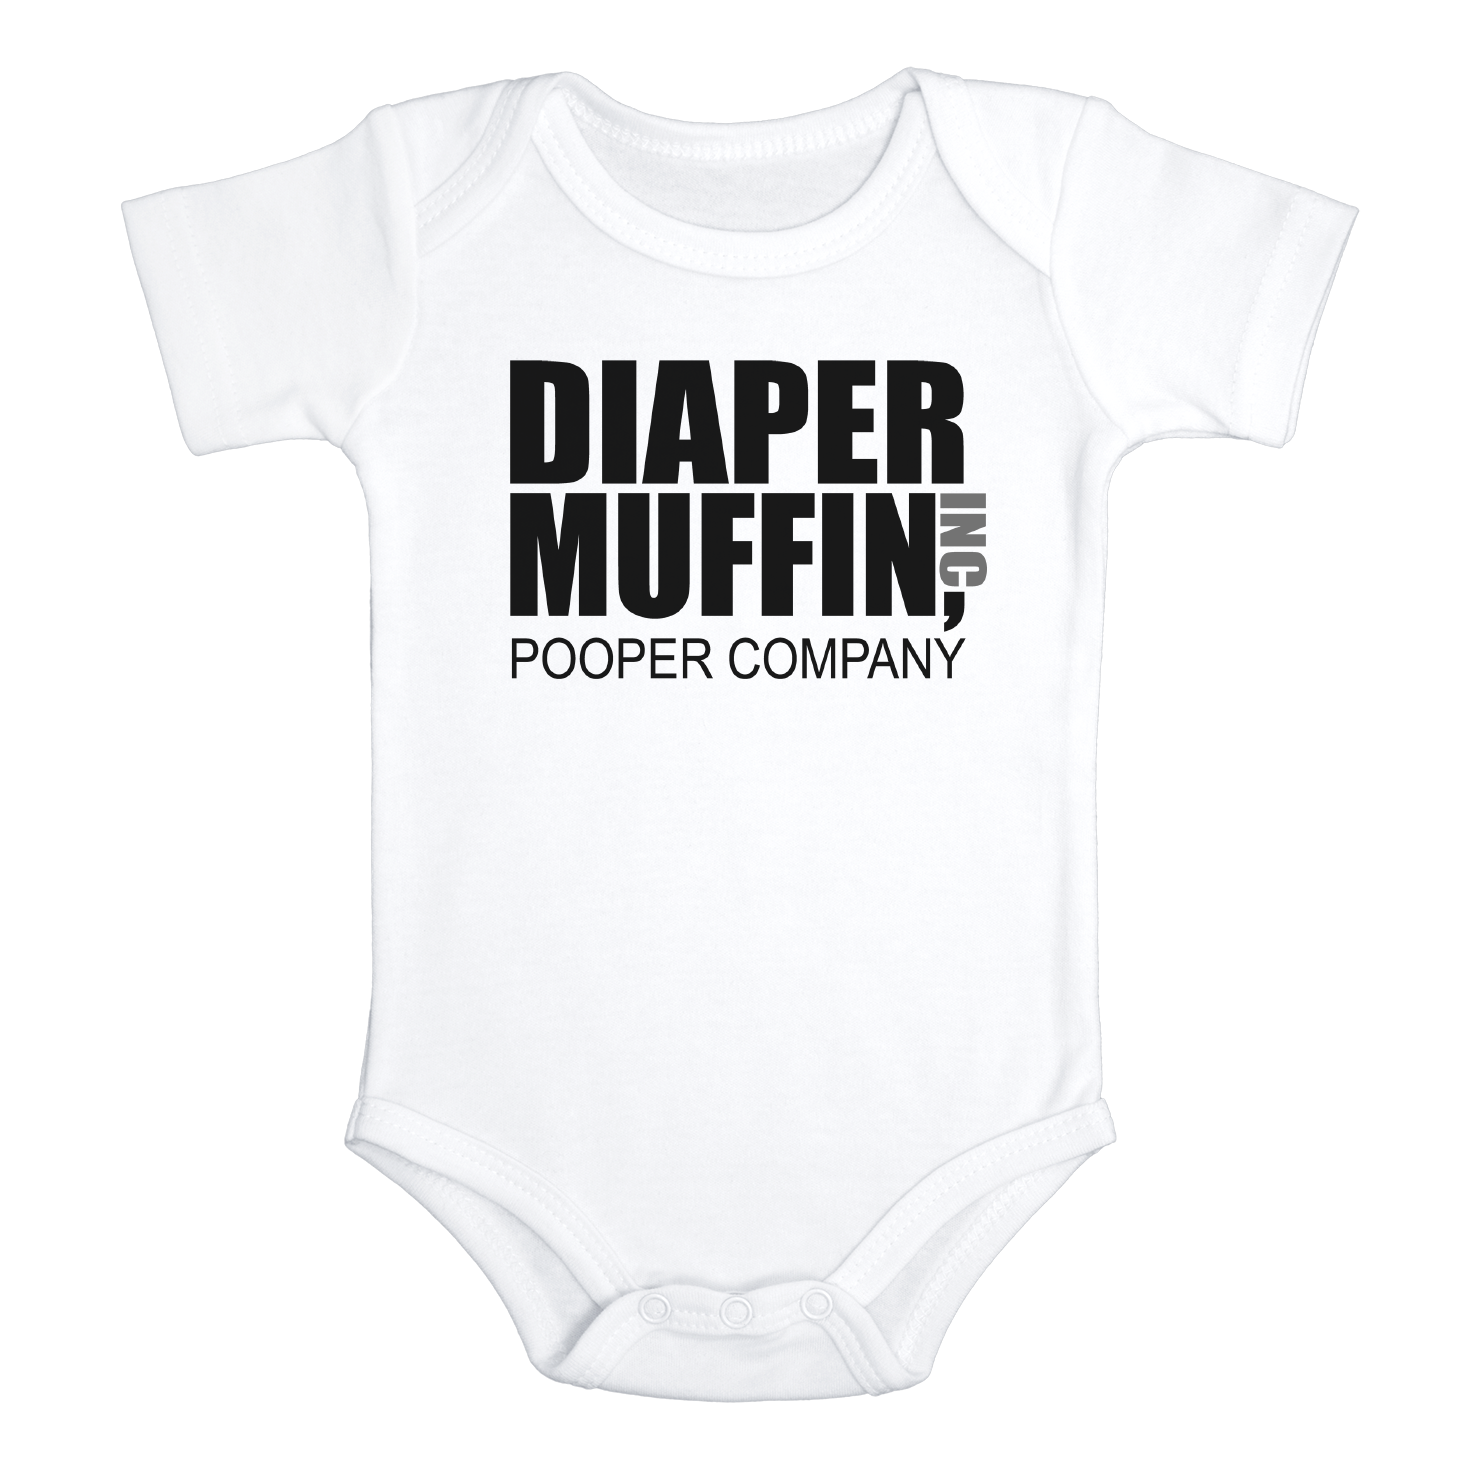 DIAPER MUFFIN INC POOPER COMPANY Funny the office baby onesies bodysuit (white: short or long sleeve)